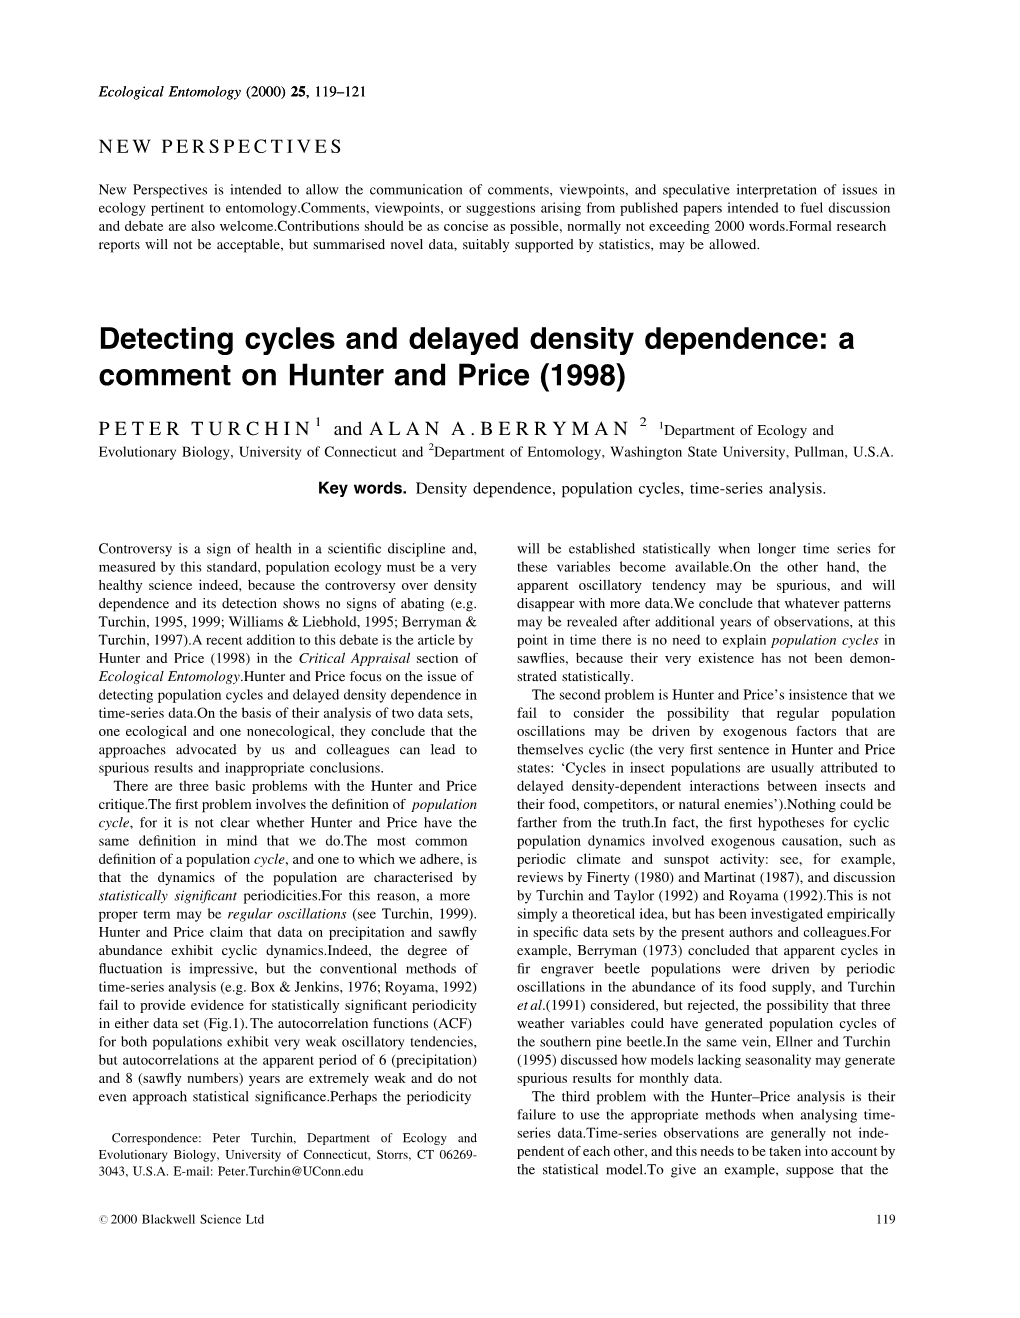 Detecting Cycles and Delayed Density Dependence: a Comment on Hunter and Price (1998)